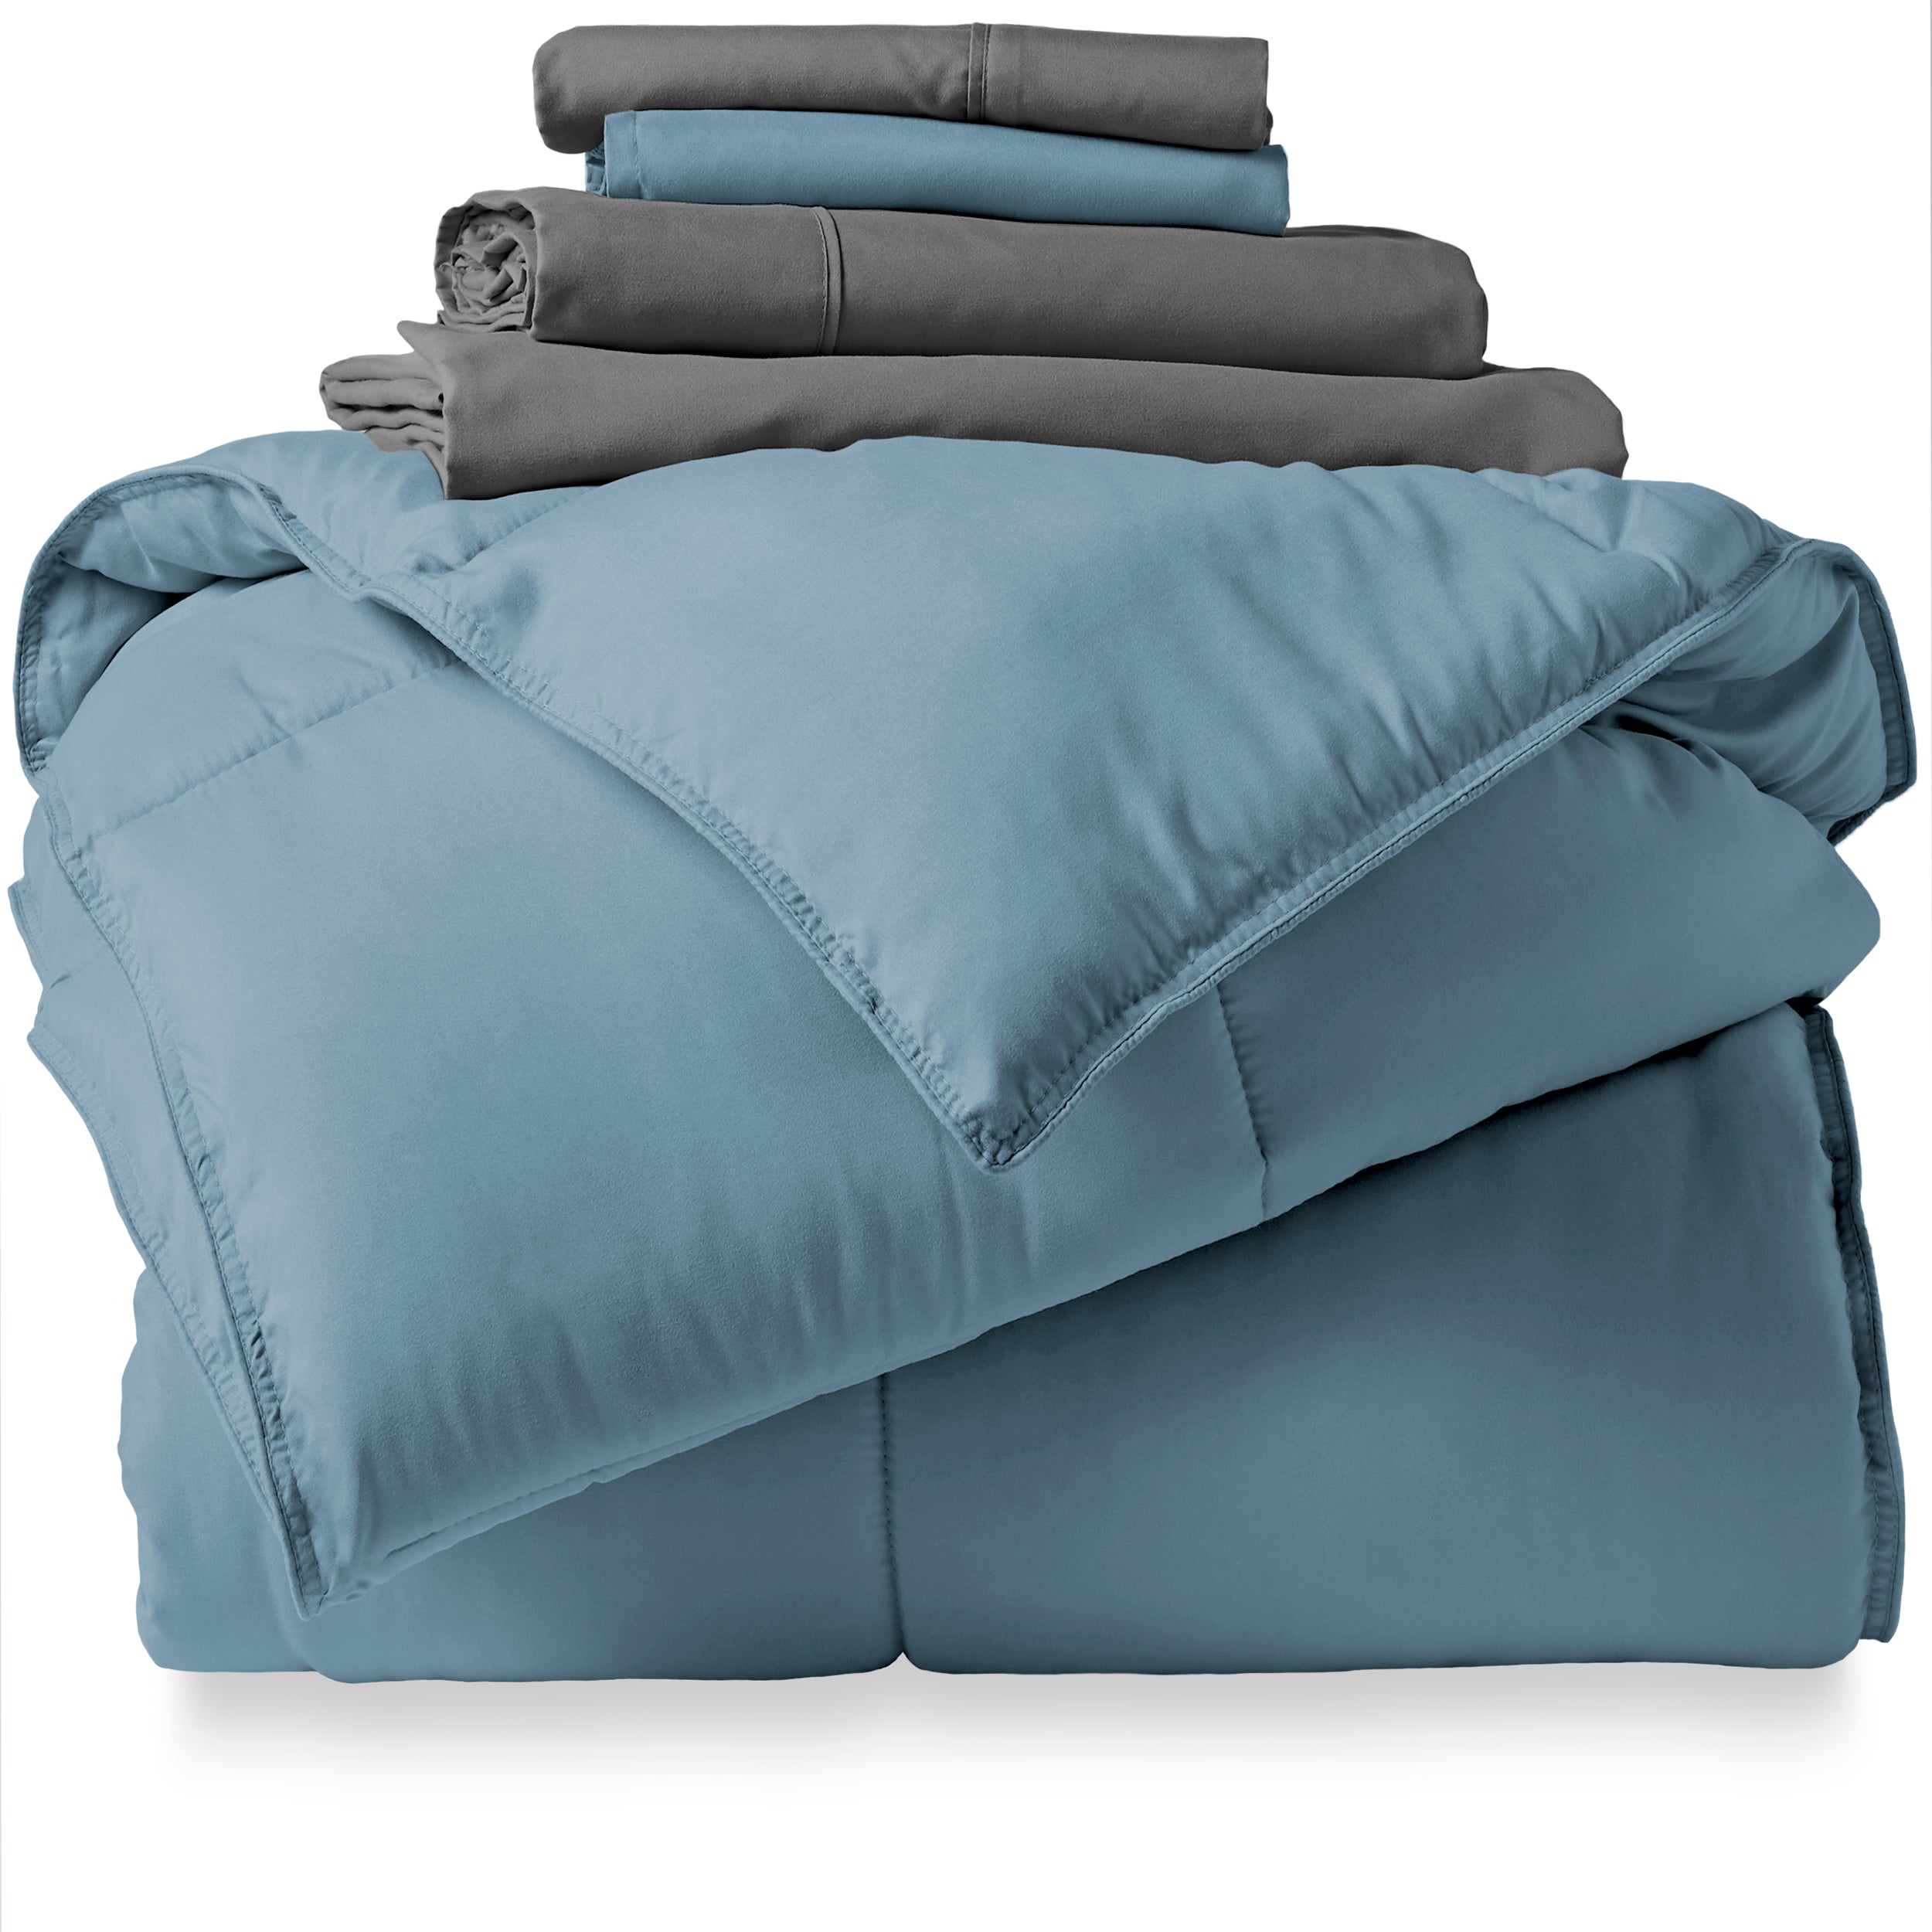 Coronet Blue Comforter Grey Sheets Bed-in-a-bag